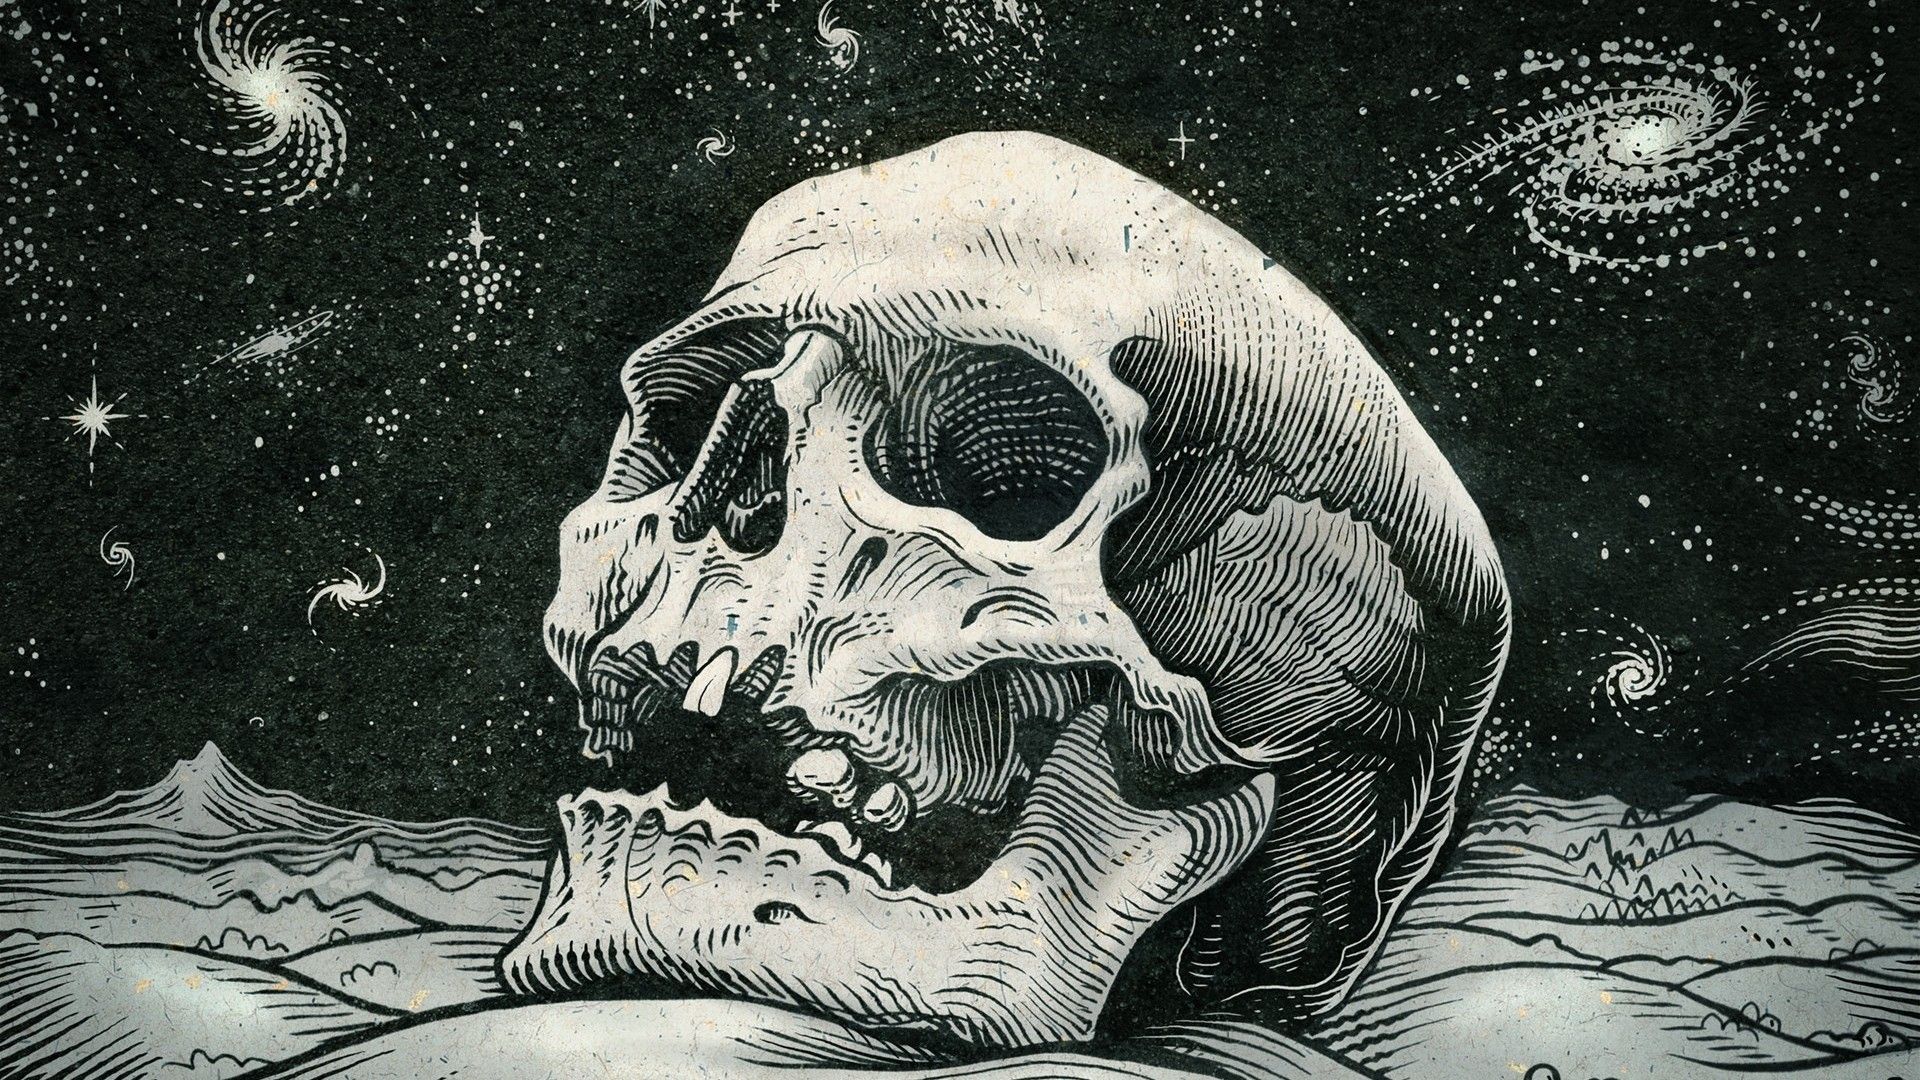 A drawing of an old skull in the sand - Skull